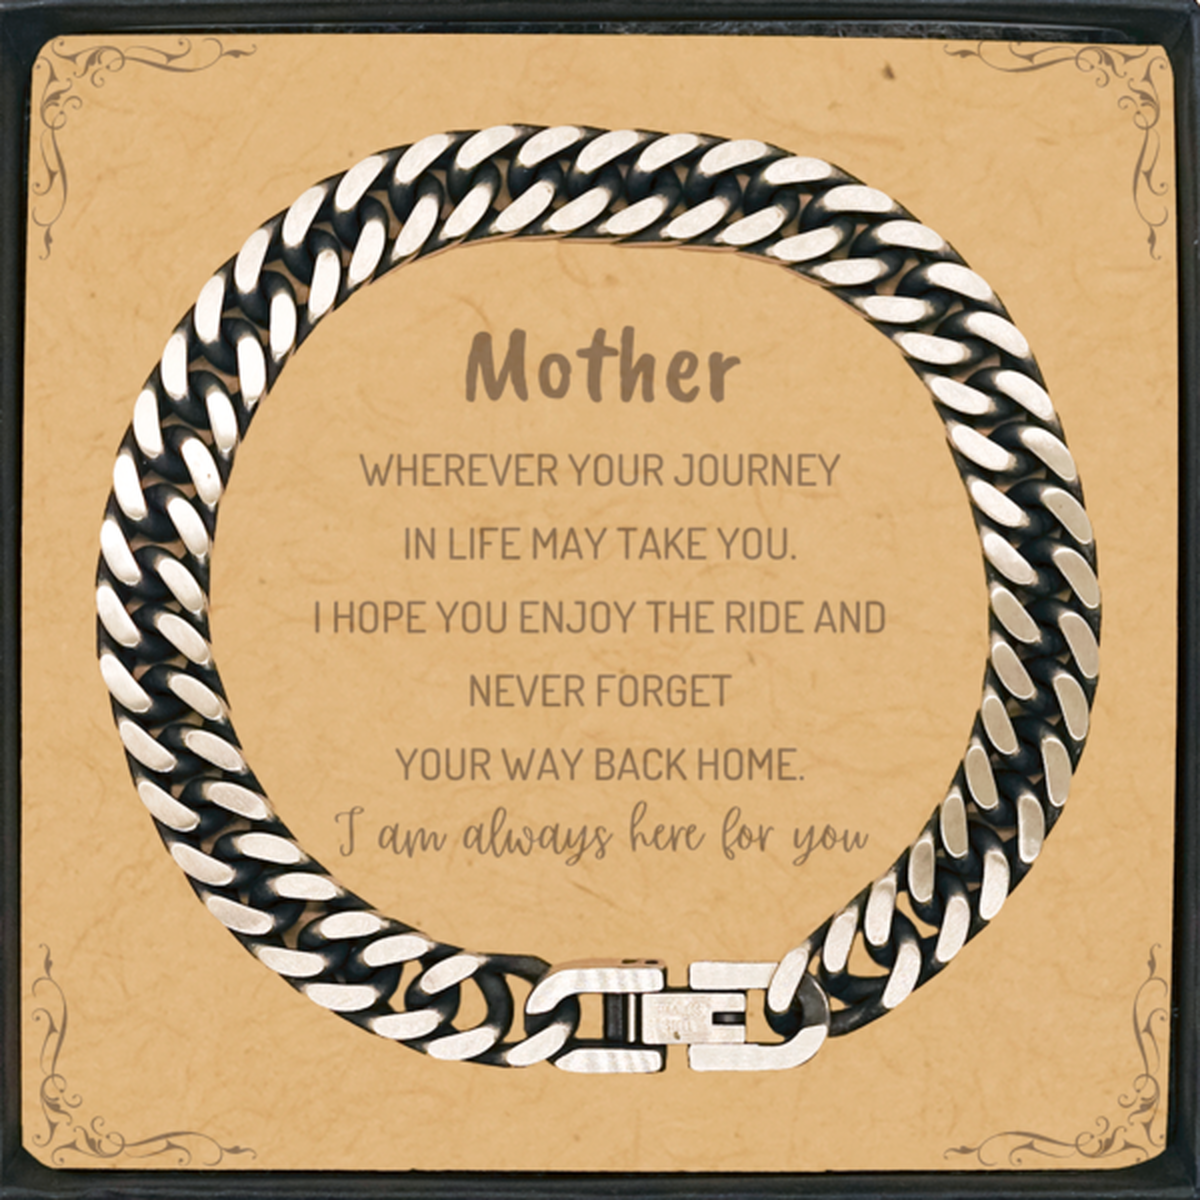 Mother wherever your journey in life may take you, I am always here for you Mother Cuban Link Chain Bracelet, Awesome Christmas Gifts For Mother Message Card, Mother Birthday Gifts for Men Women Family Loved One